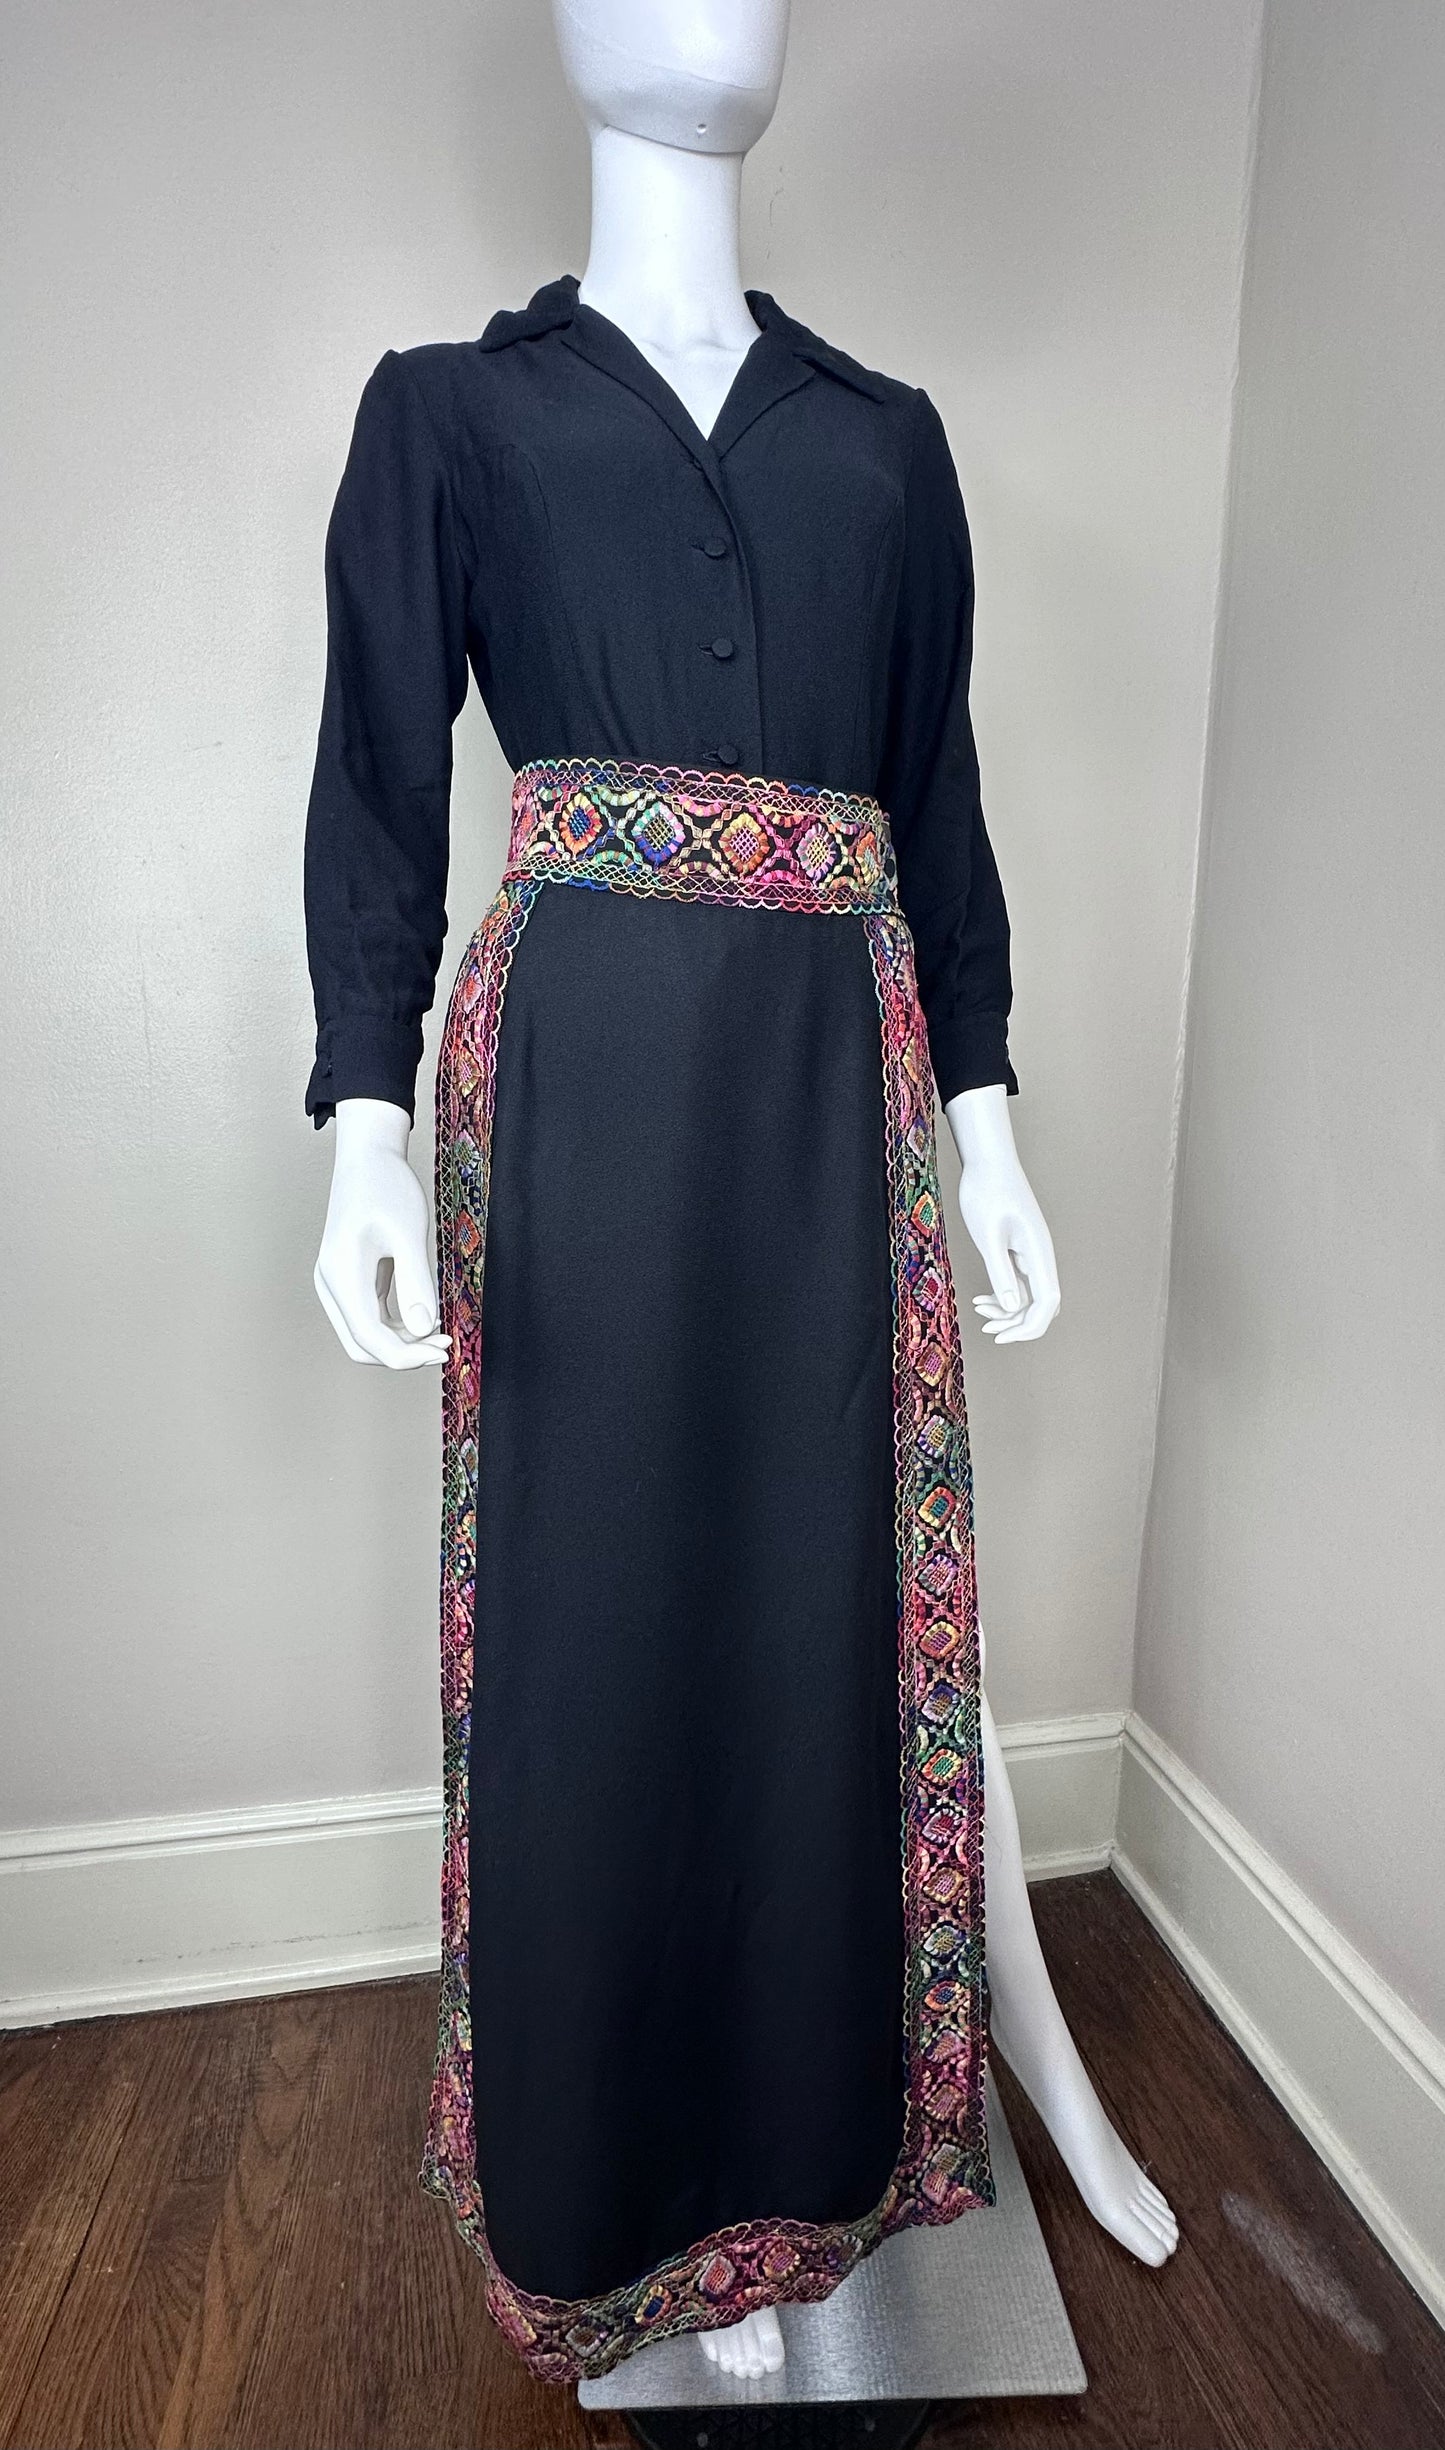 1960s/70s Black Romper with Rainbow Embroidered Skirt, Jack Bryan Designed by Dupuis Size XS-Small